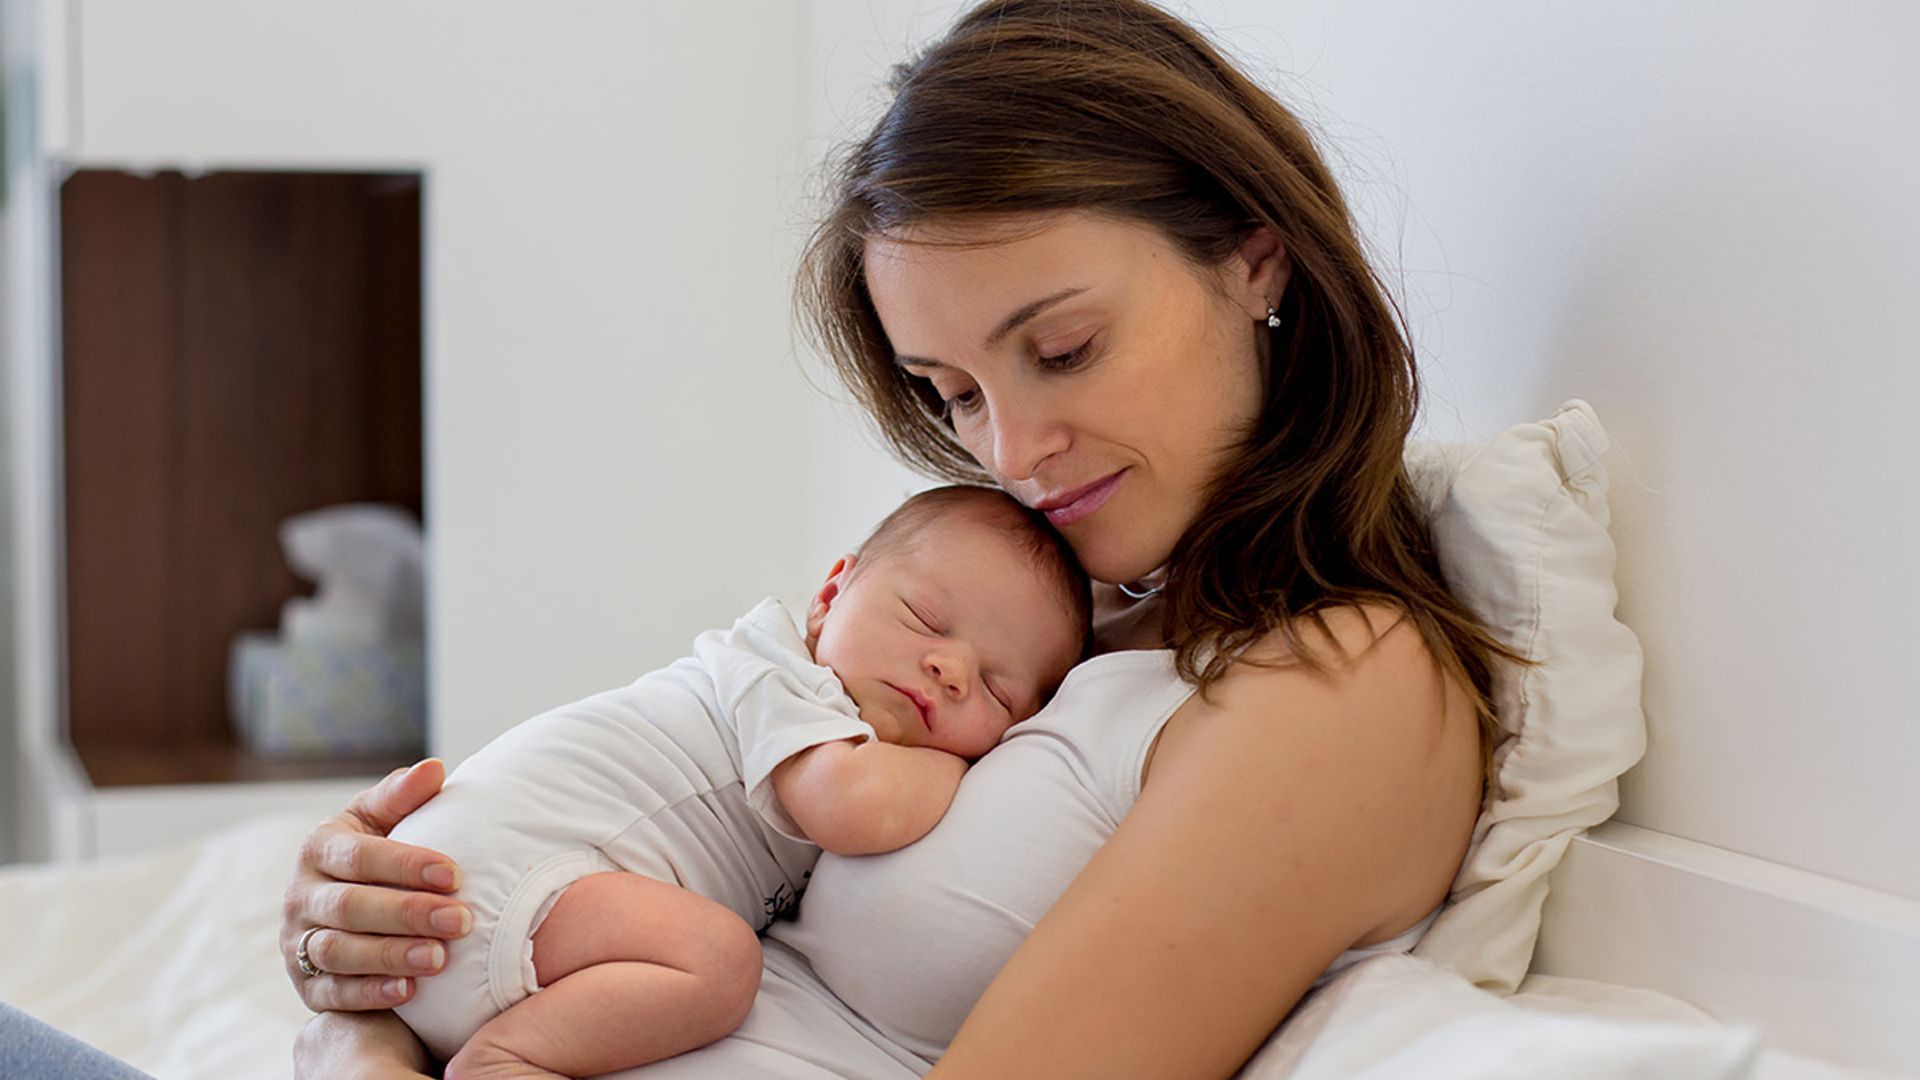 New Mom Recovery Tips: Post-Pregnancy Do's & Don'ts